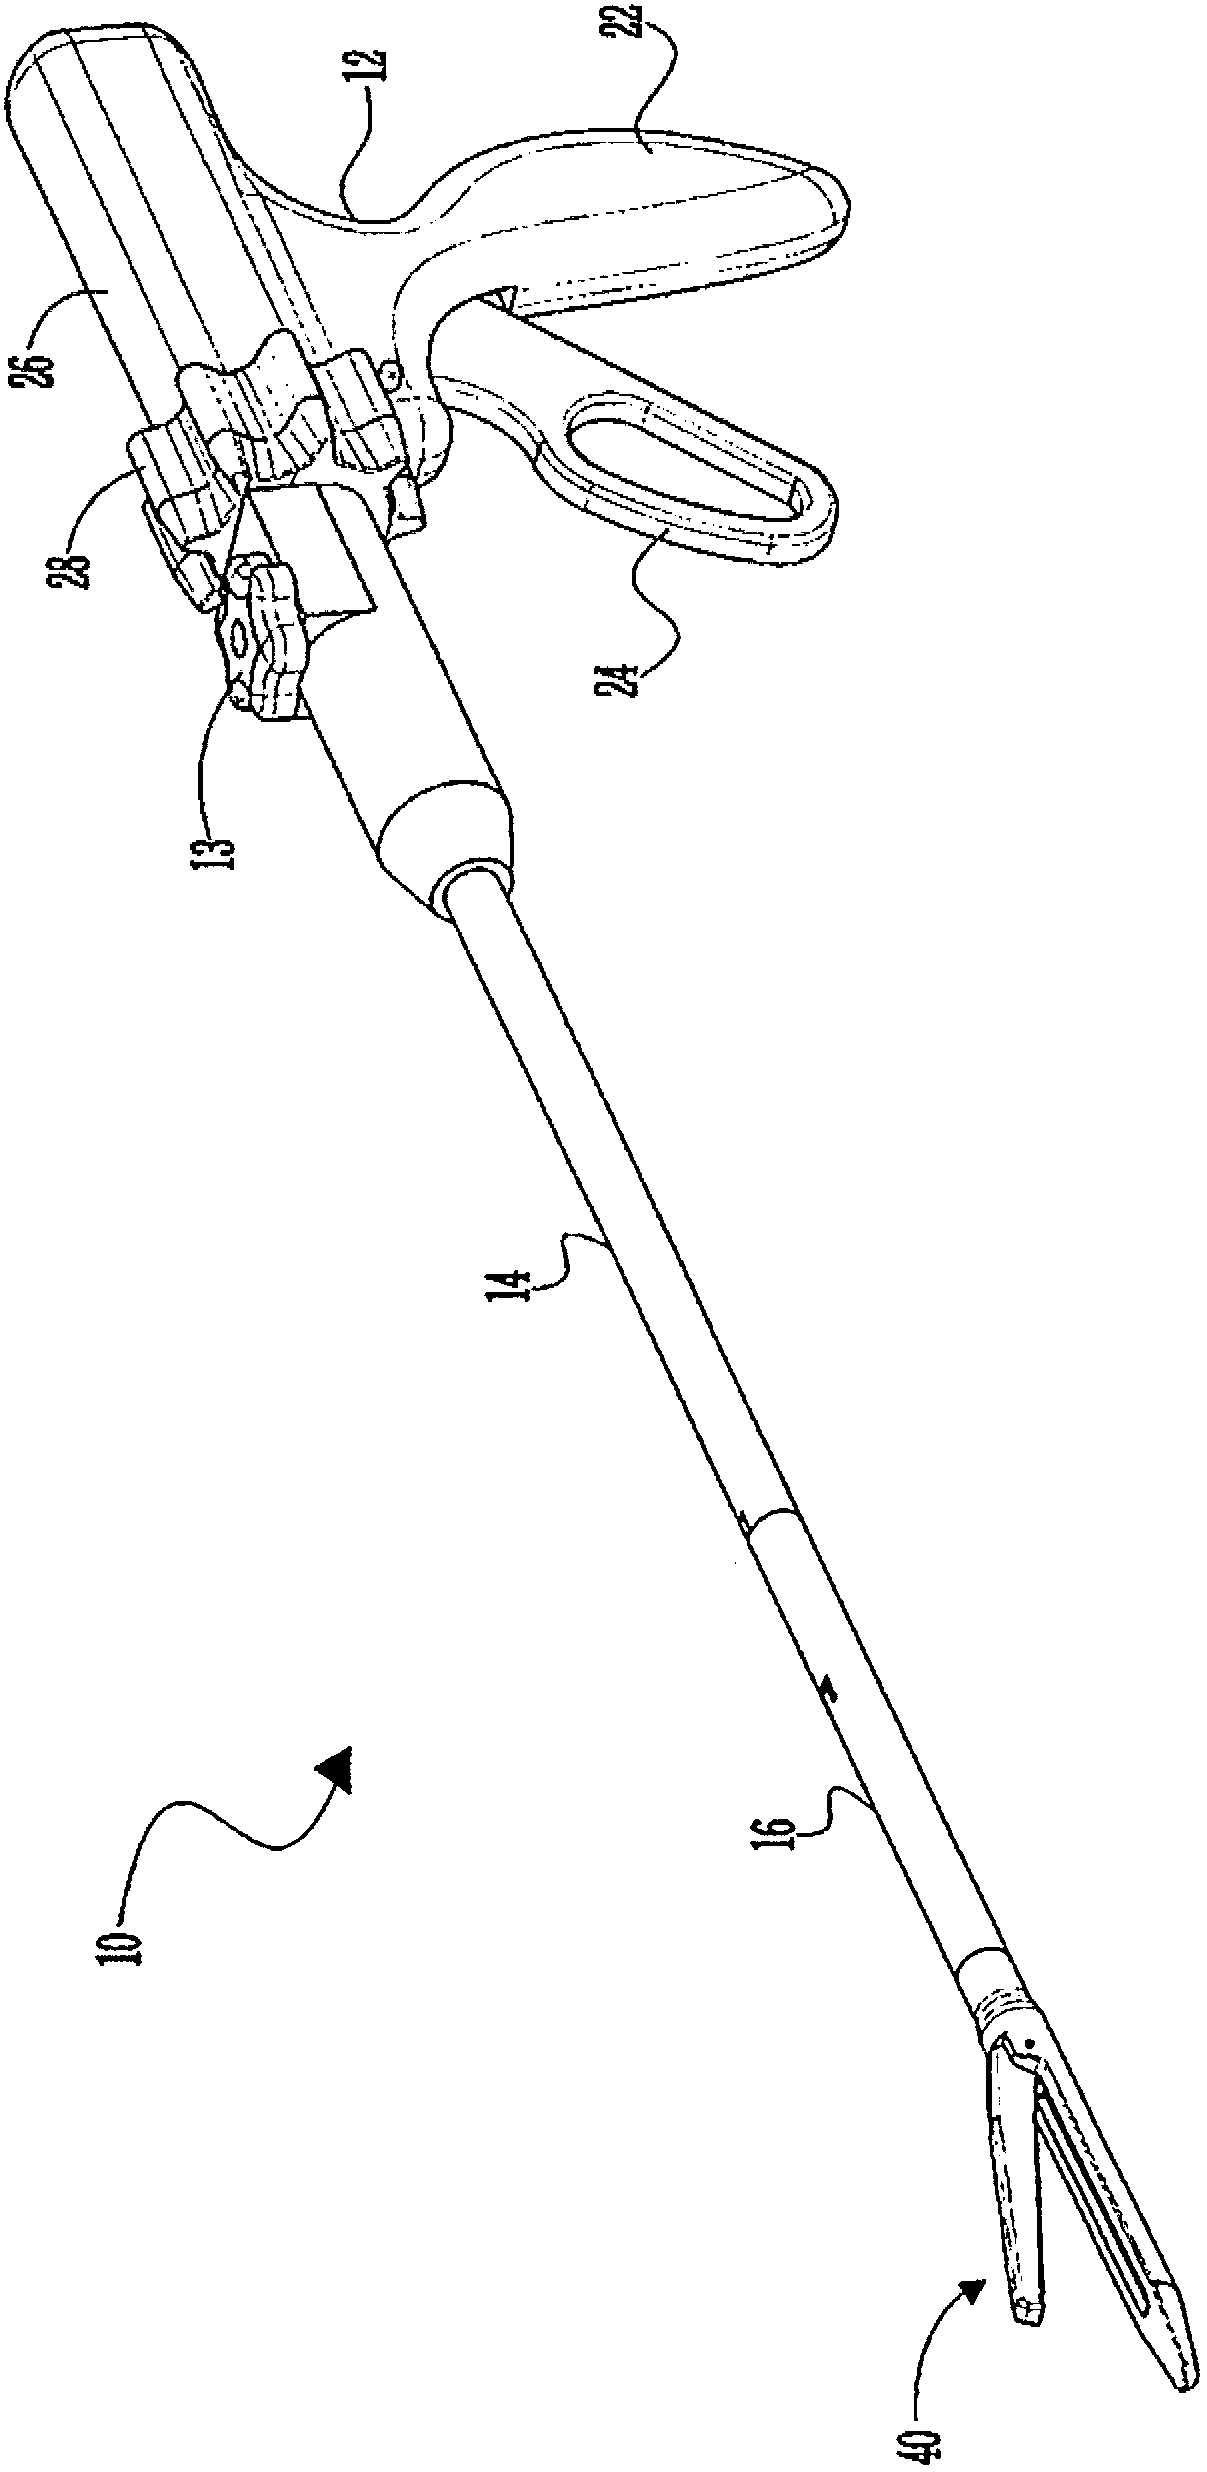 Tissue dissection and removal device